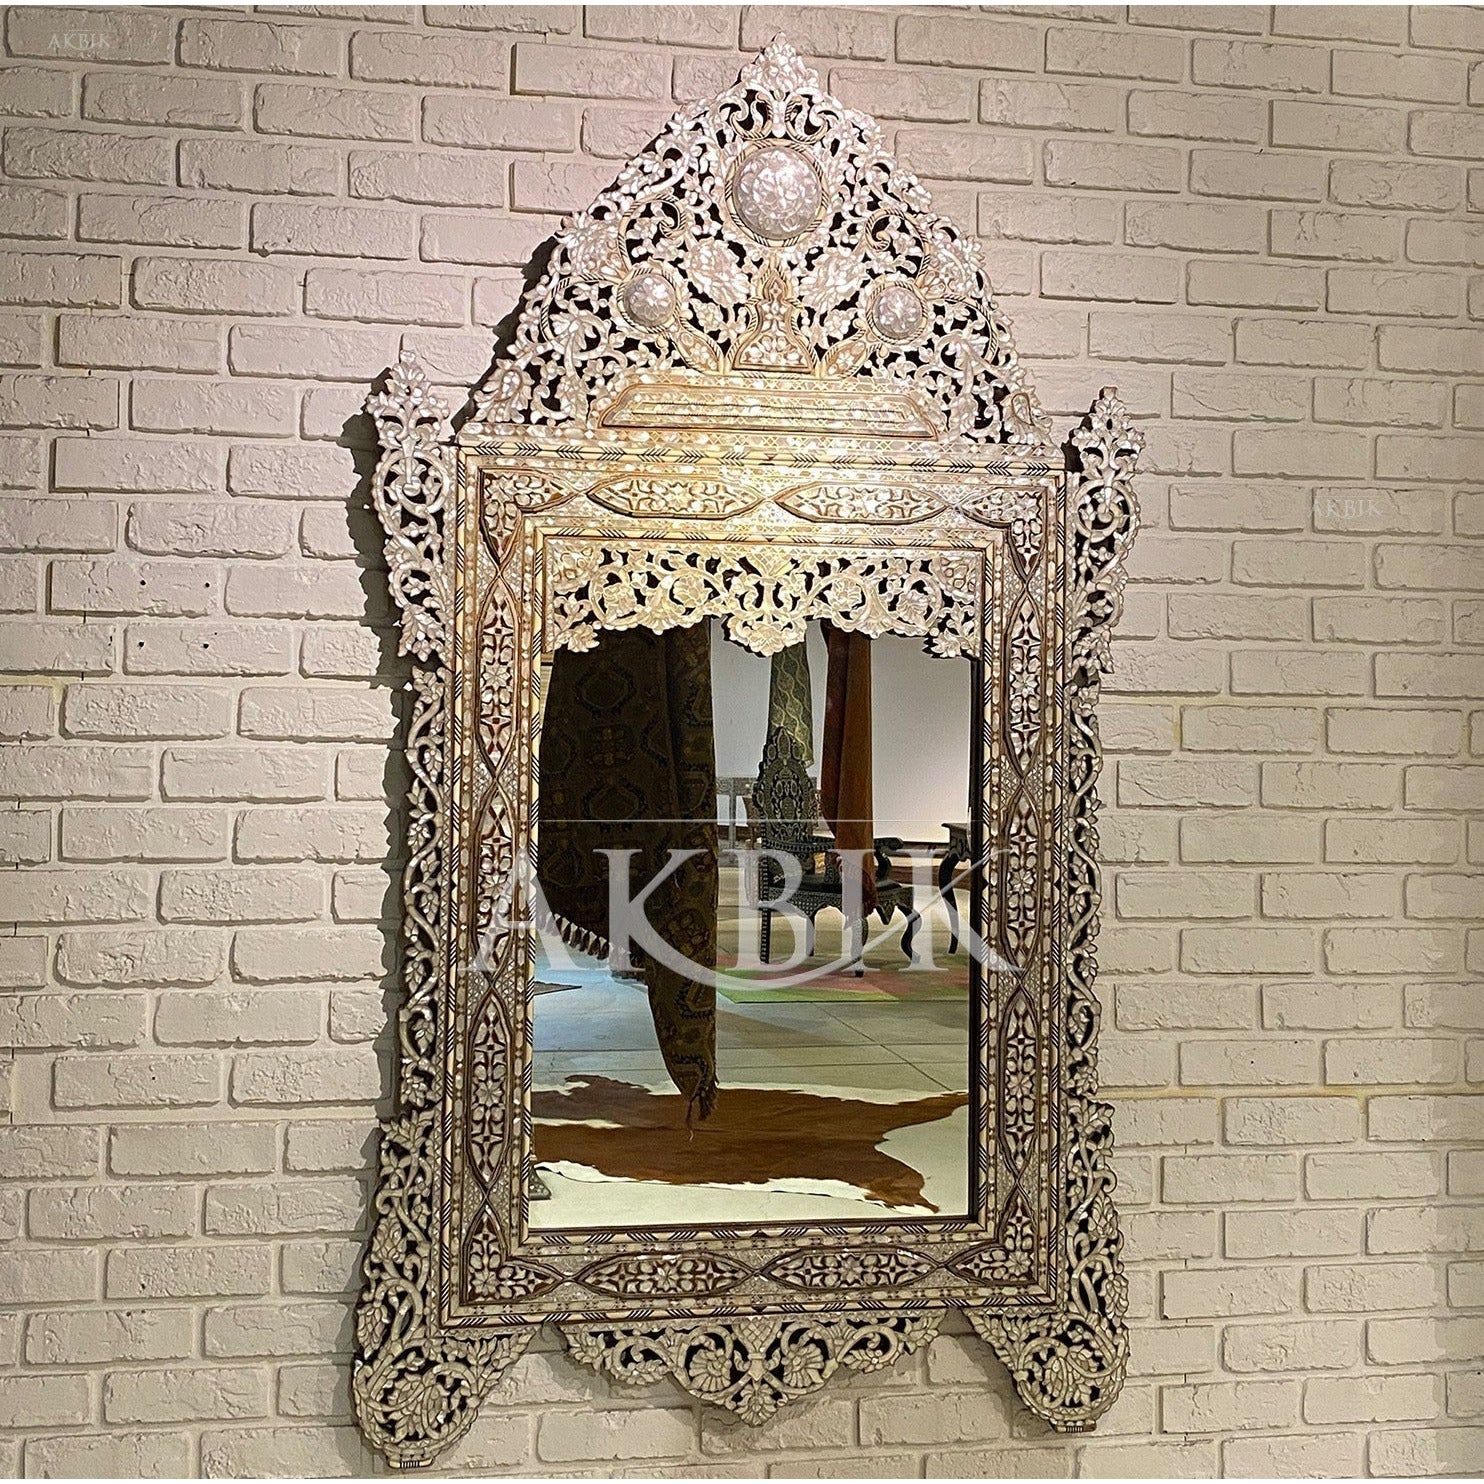 Syrian mother of pearl mirror frames carved by hand